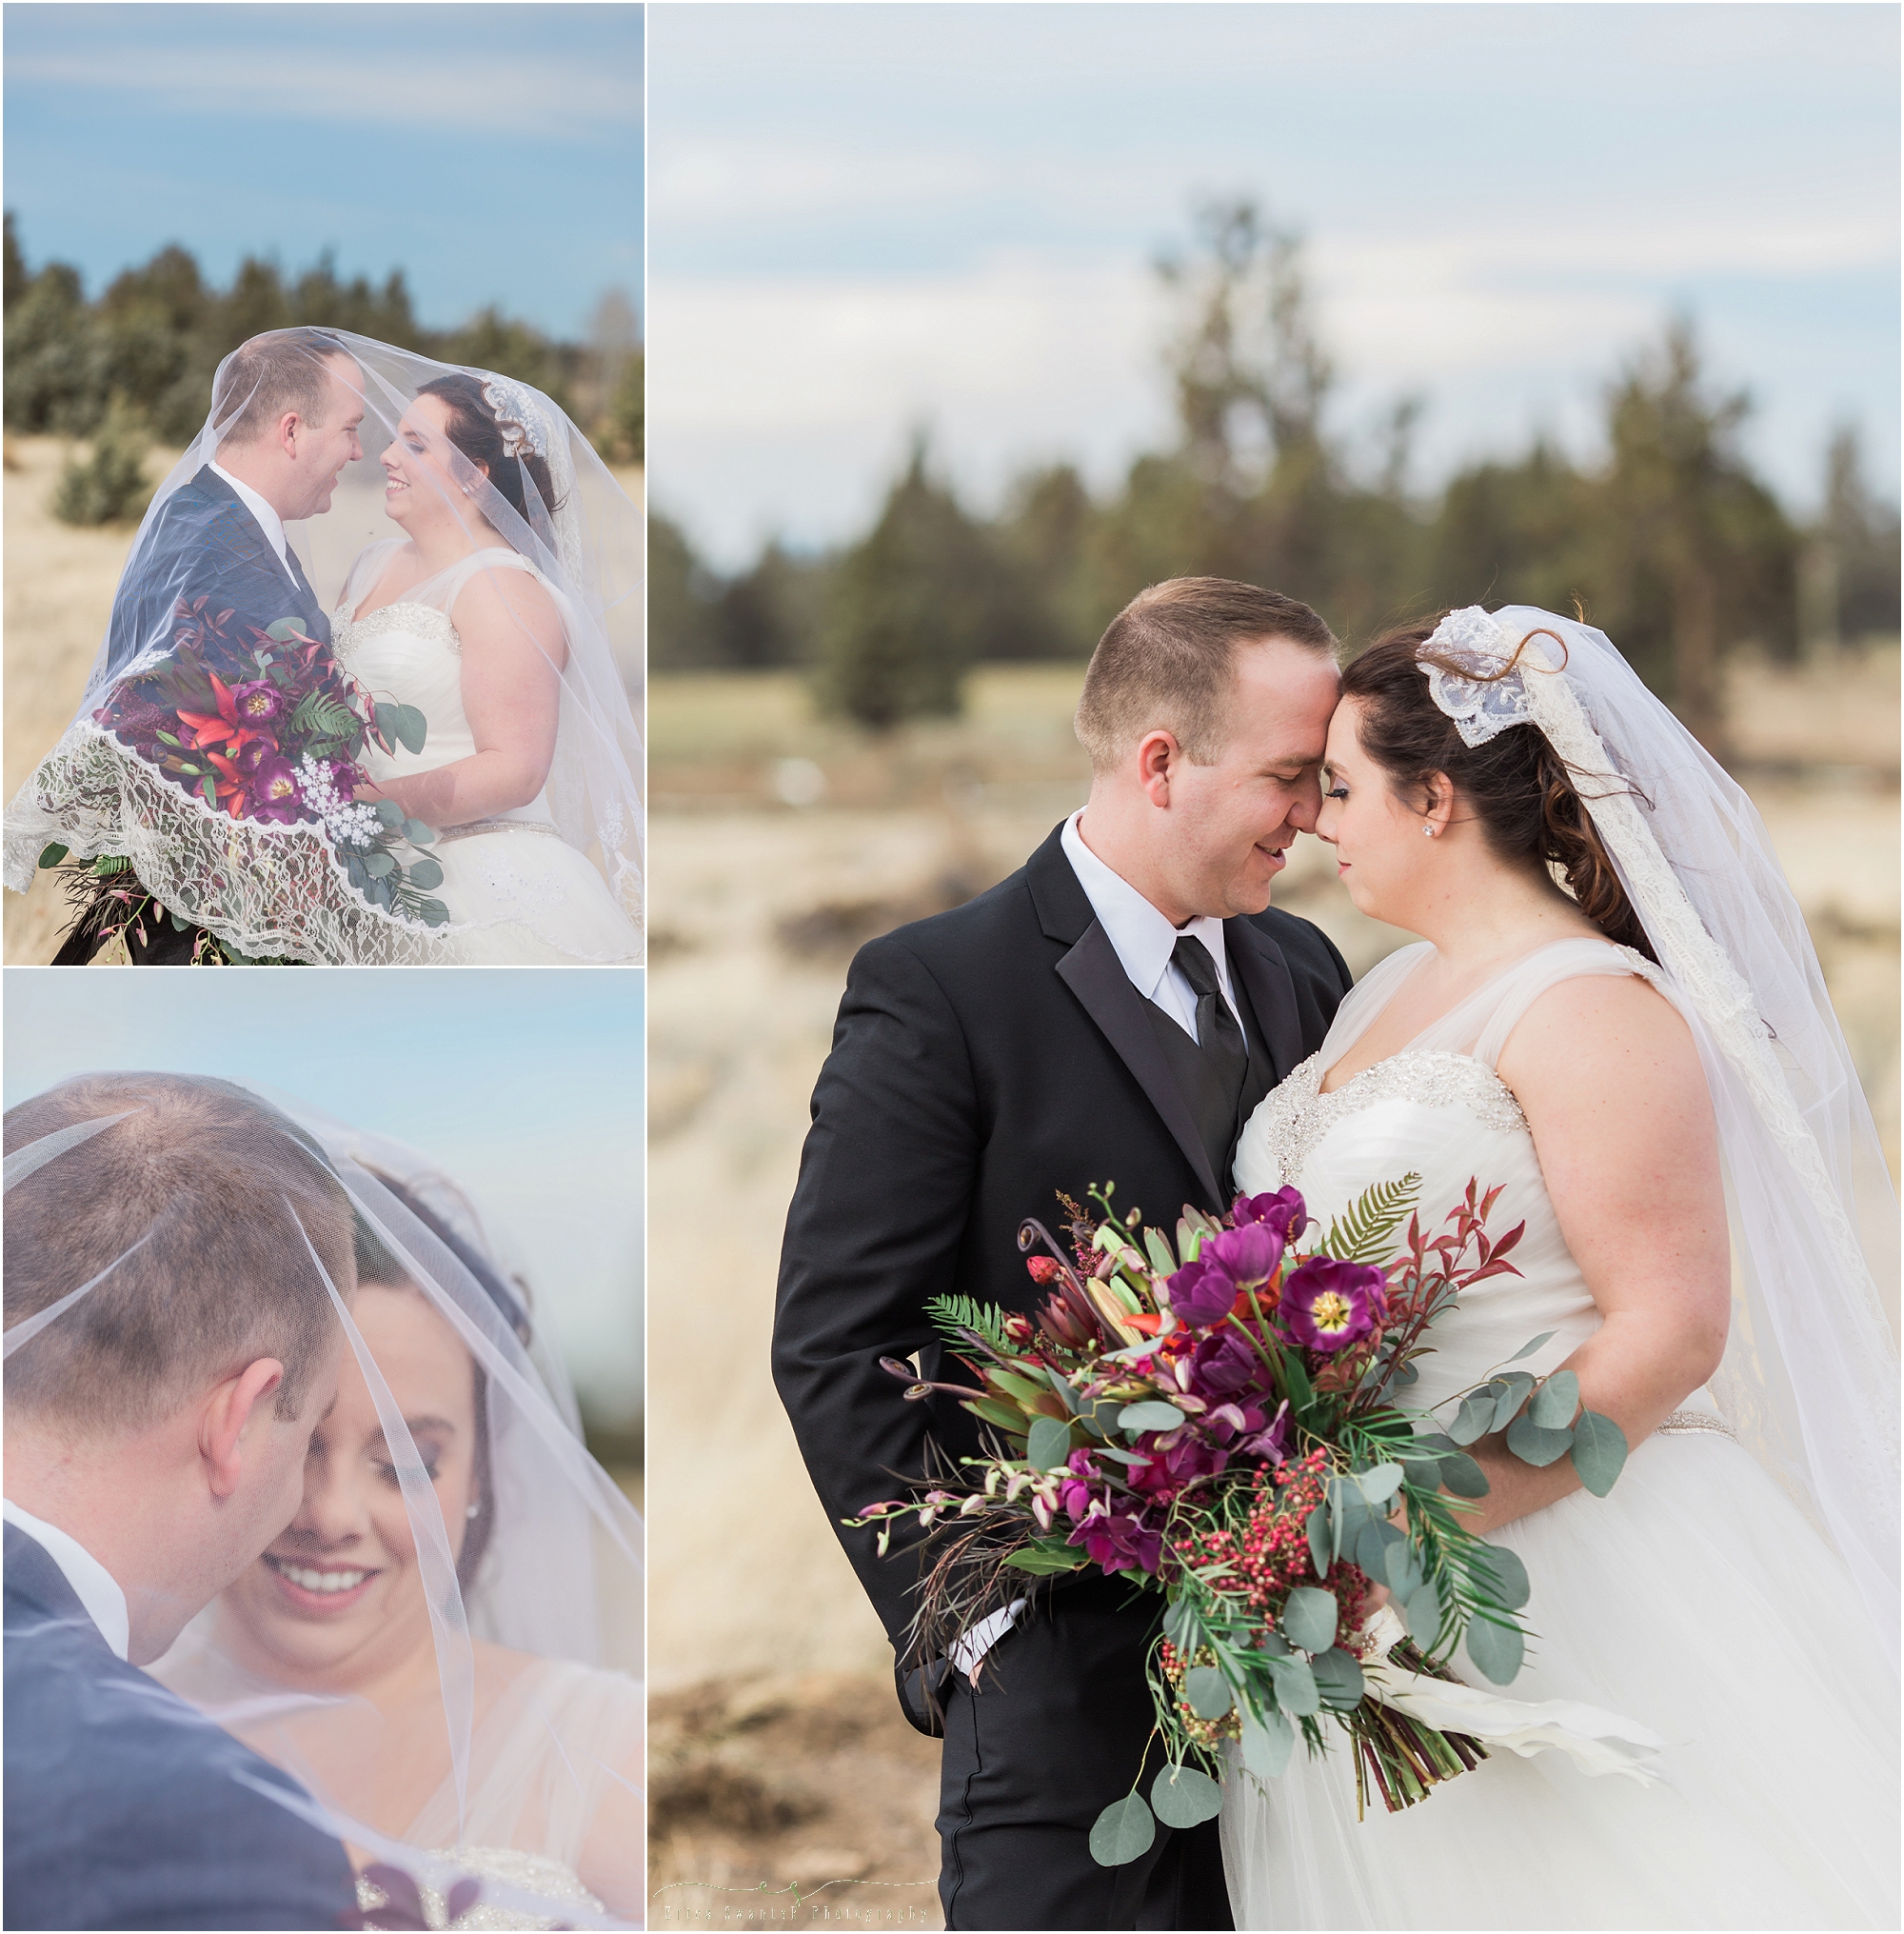 Gorgeous bride and groom under the bride's full length veil in this outdoor portrait at Bend's Seventh Day Adventist Church. 